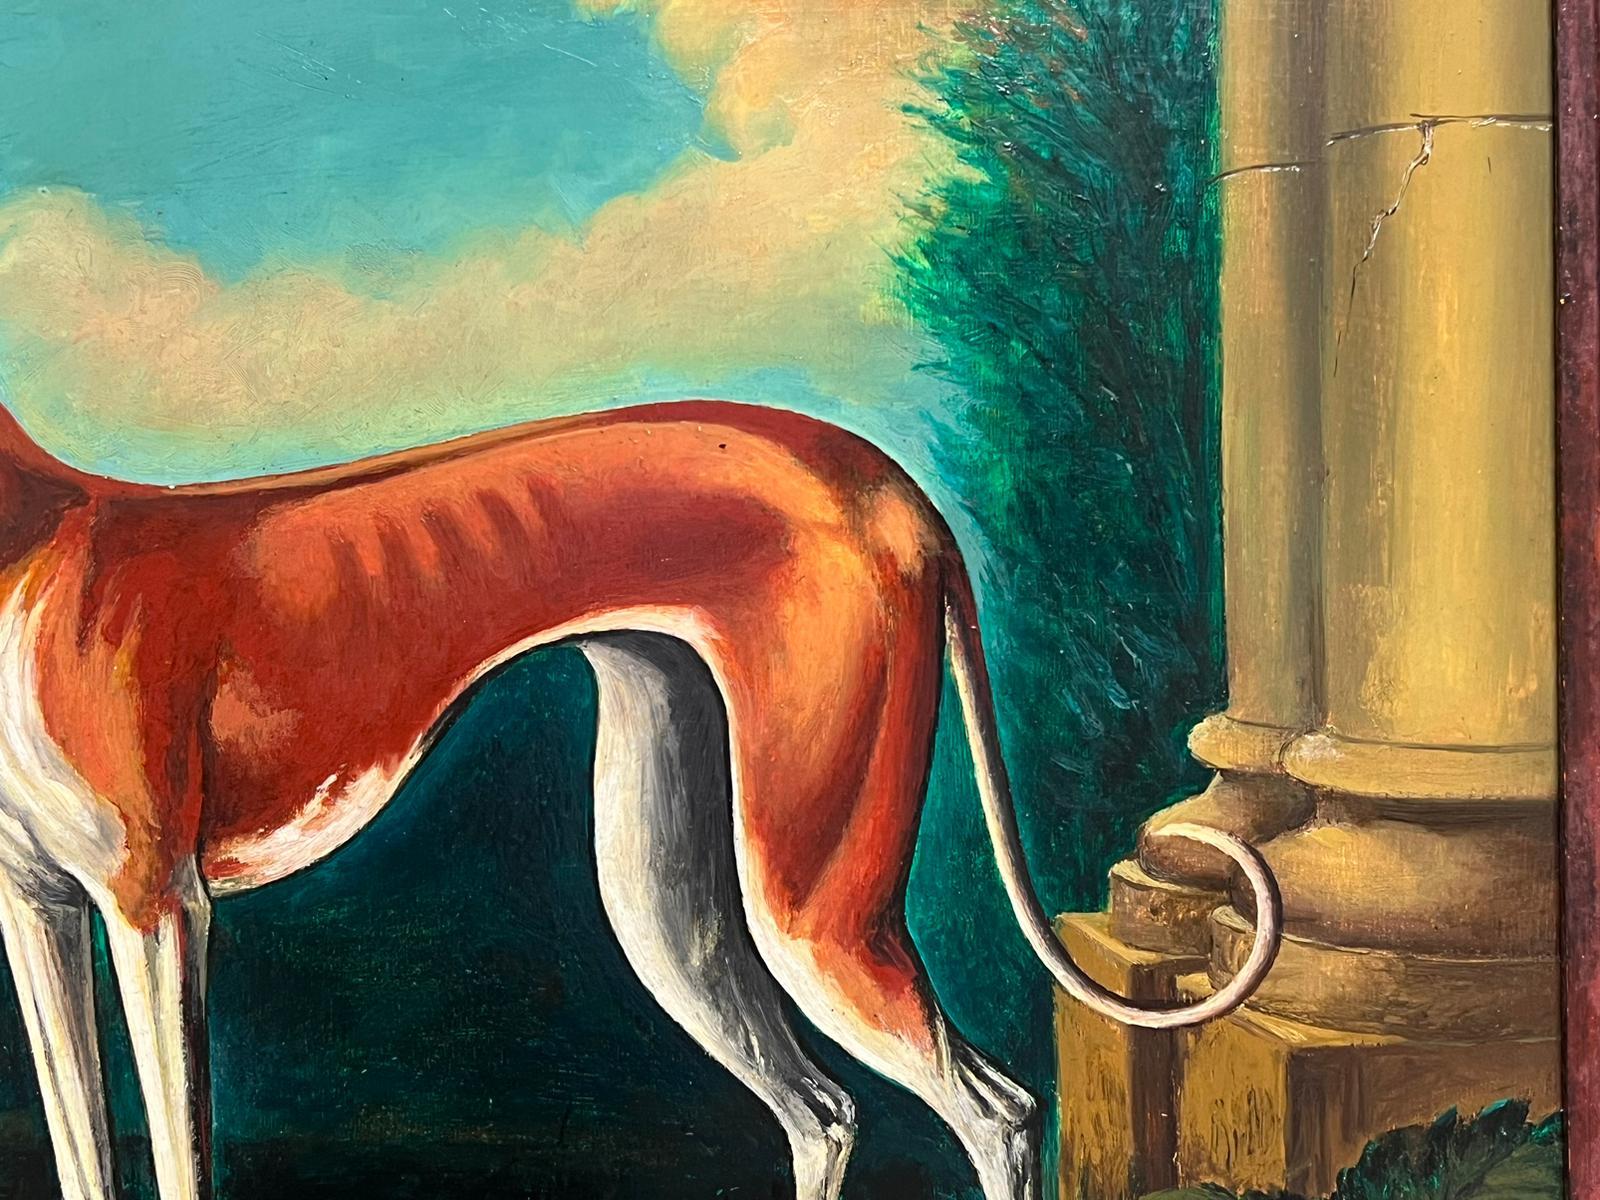 Whippet in Classical Landscape
Michael Constable (20th Century British School)
oil on board, framed
framed: 19 x 25 inches
board: 15 x 21 inches
provenance: private collection, The Cotswolds, England
condition: very good and sound condition